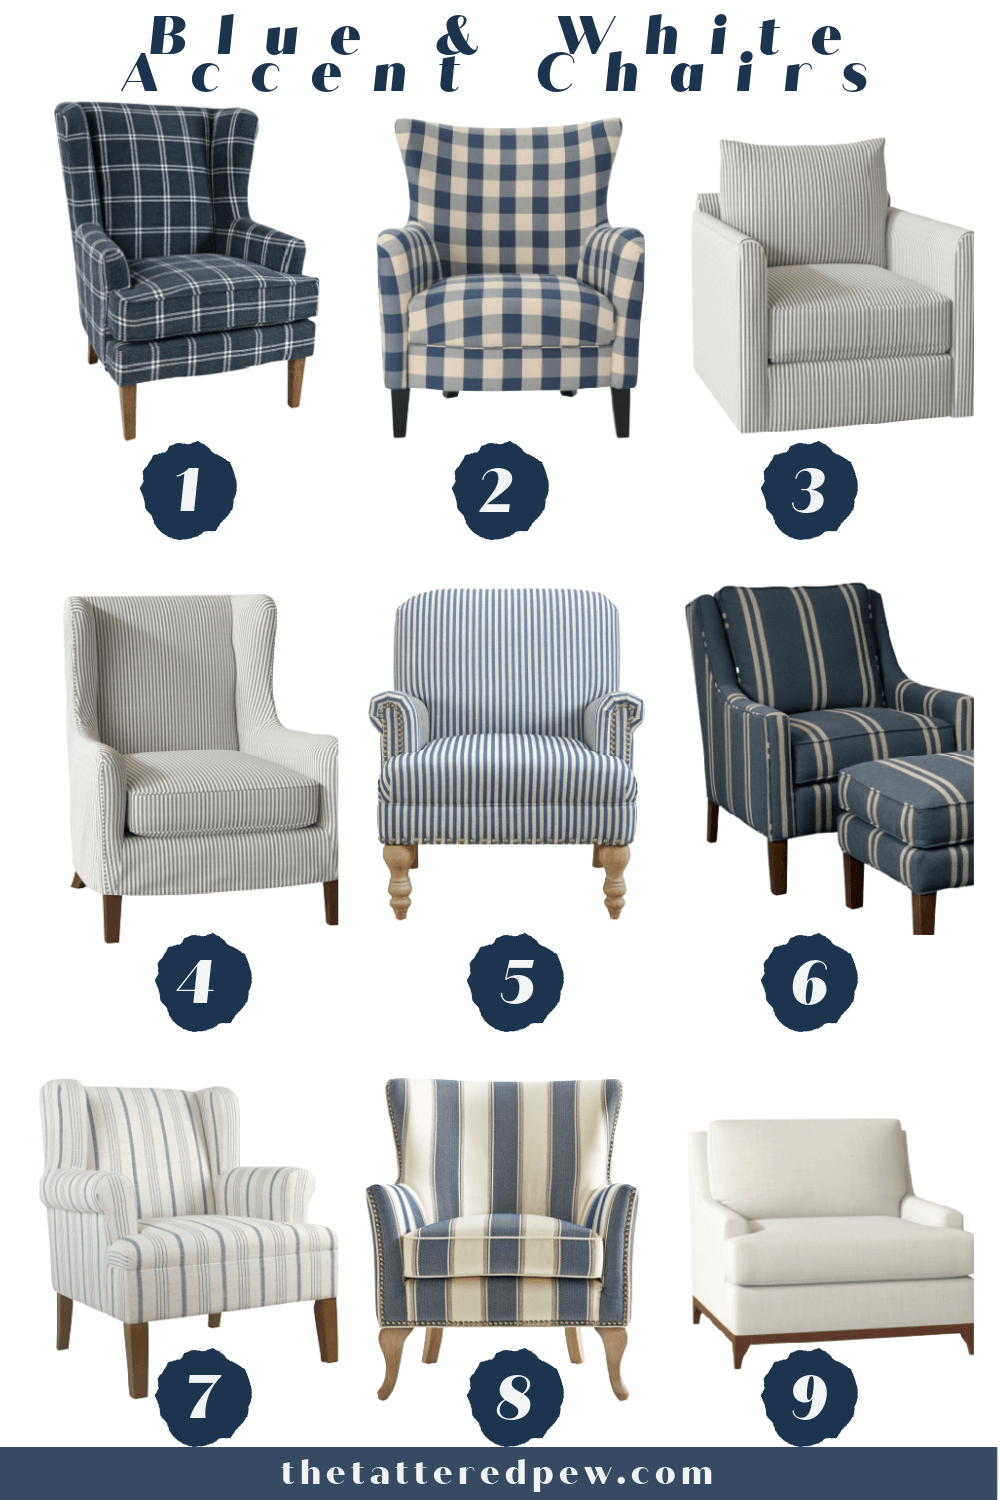 Check out these 9 blue and white accent chairs all from Wayfair!